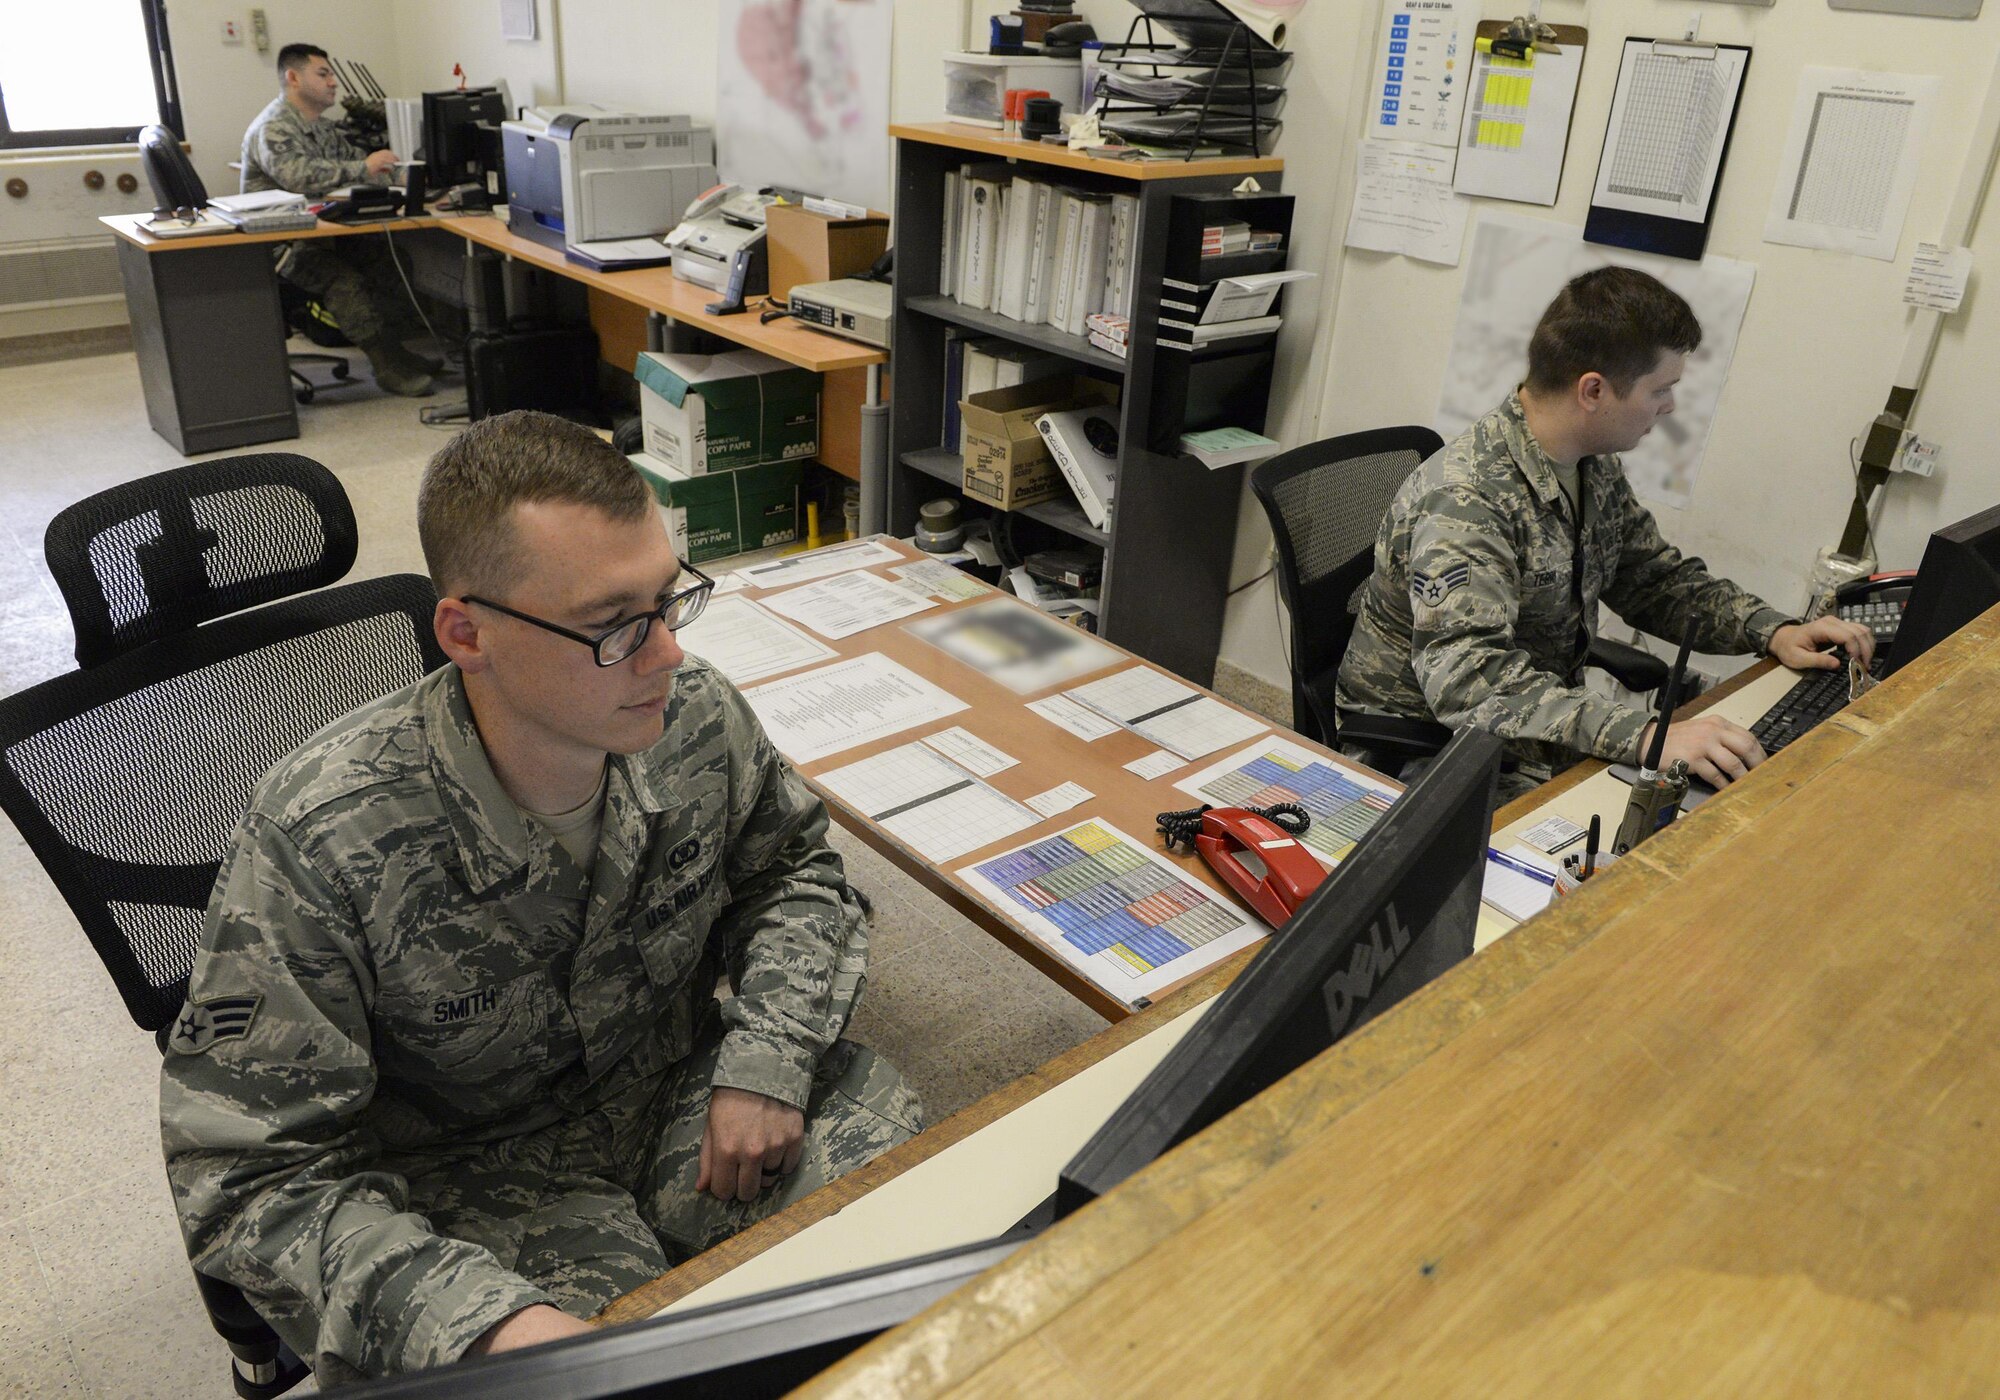 U.S. Air Force Senior Airmen Thomas Smith, foreground left, and William Terry, foreground right, airfield management shift leads and Tech. Sgt. Santino Sustaita, airfield driving program manager, background, all assigned to the 379th Expeditionary Office of Strategic Services, work on their computers at Al Udeid, Air Force Base, Qatar, June 7, 2017. Airfield Management oversees more than 20 million square feet of airfield at Al Udeid in addition to overseeing the airfield driving program and filing all flight plans for flights arriving to and departing from the base. (U.S. Air National Guard photo by Tech. Sgt. Bradly A. Schneider/Released)